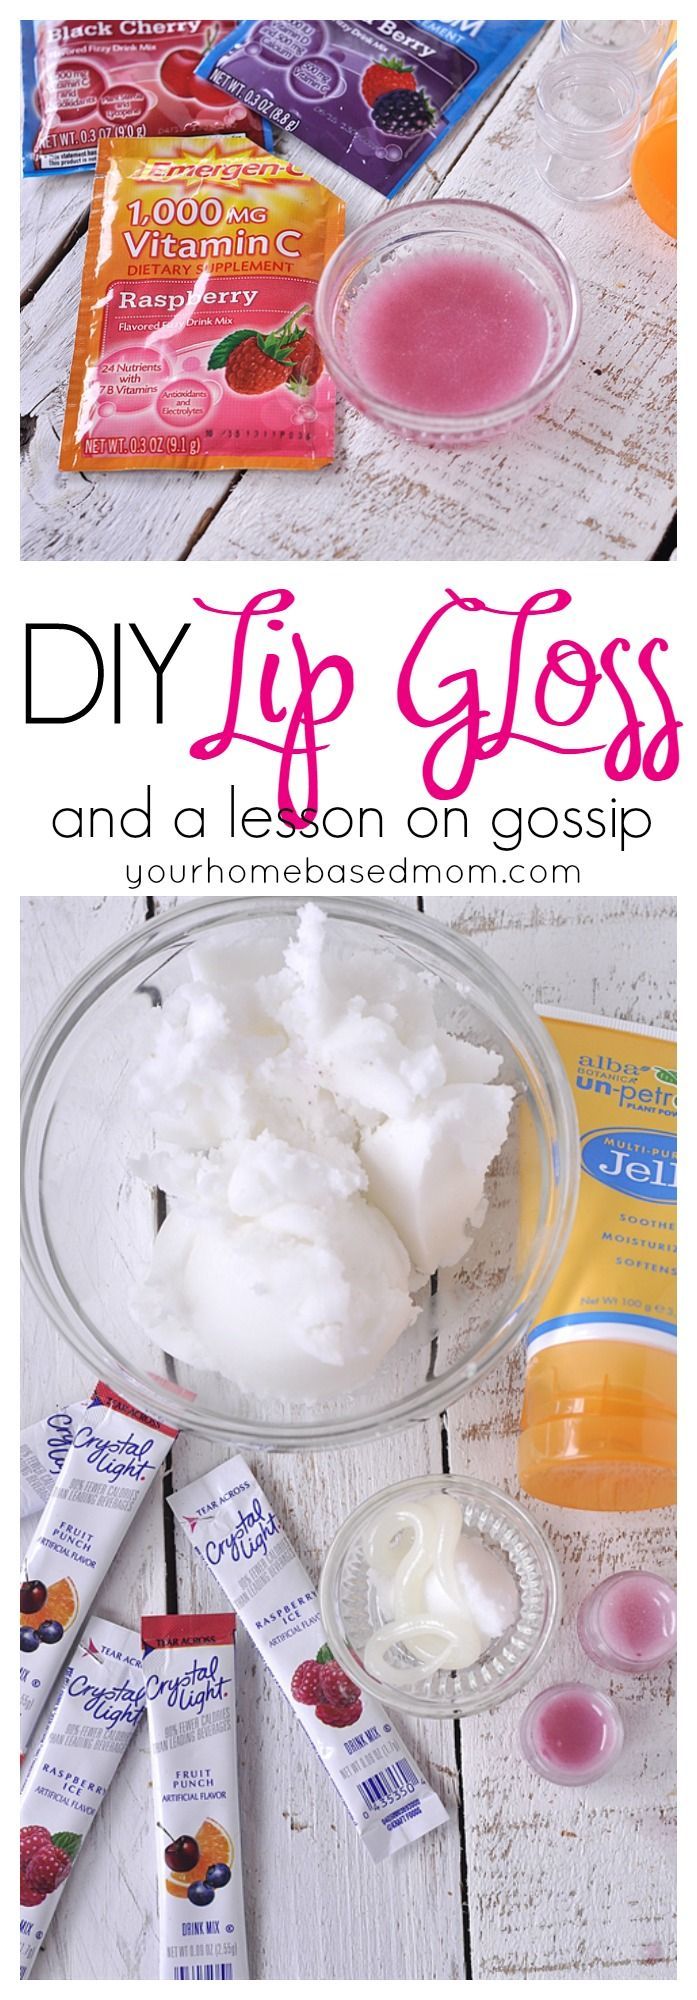 DIY Lip Gloss and a lesson on Gossip}Activity Day Idea -   17 diy projects For Women lip balm ideas